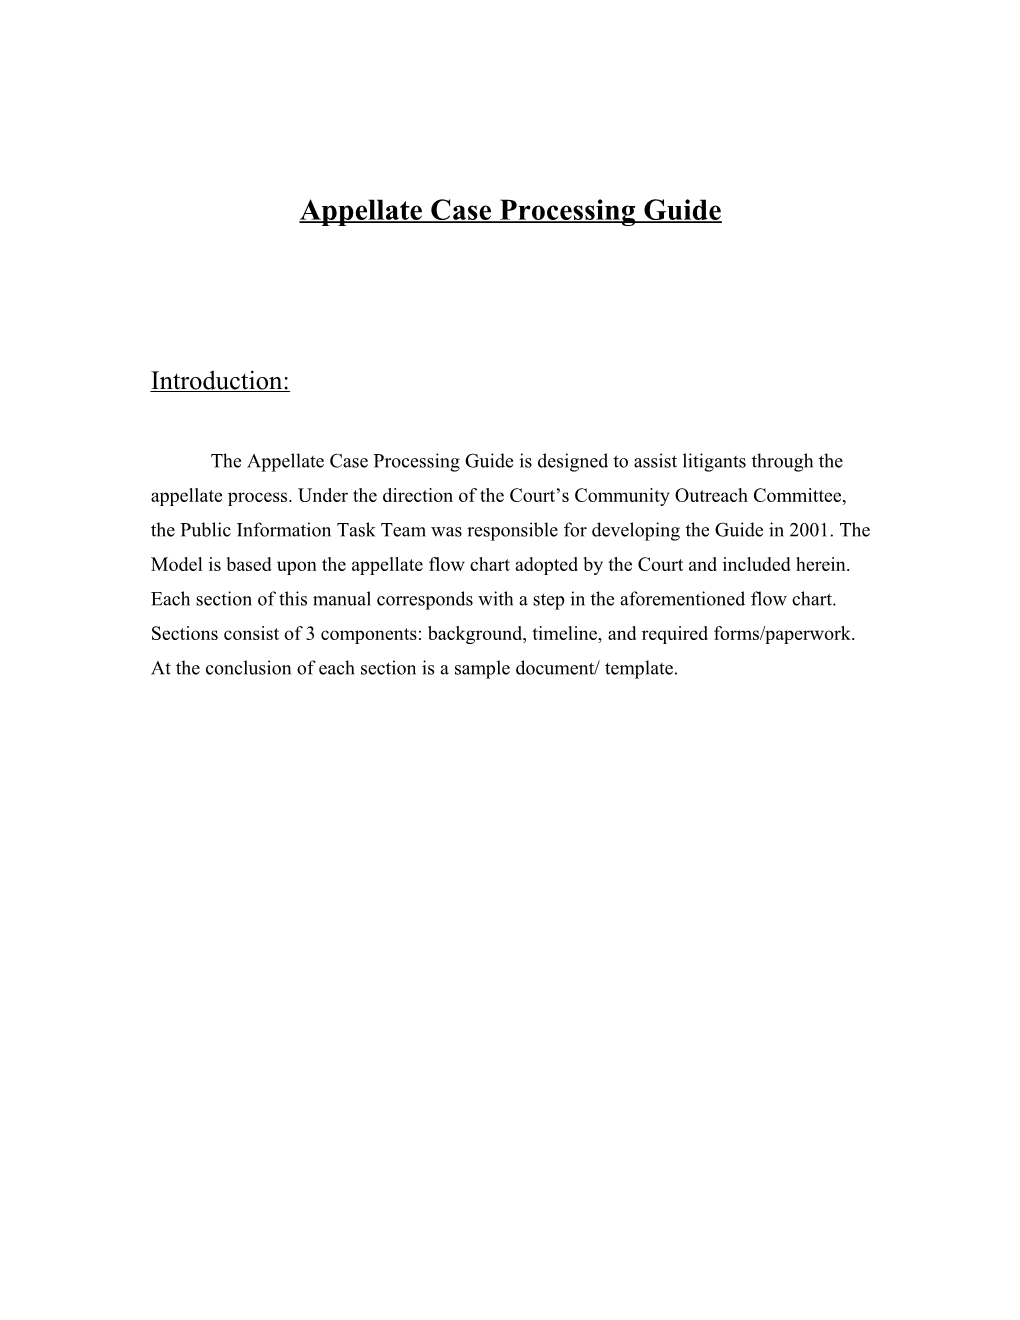 Appellate Case Processing Model